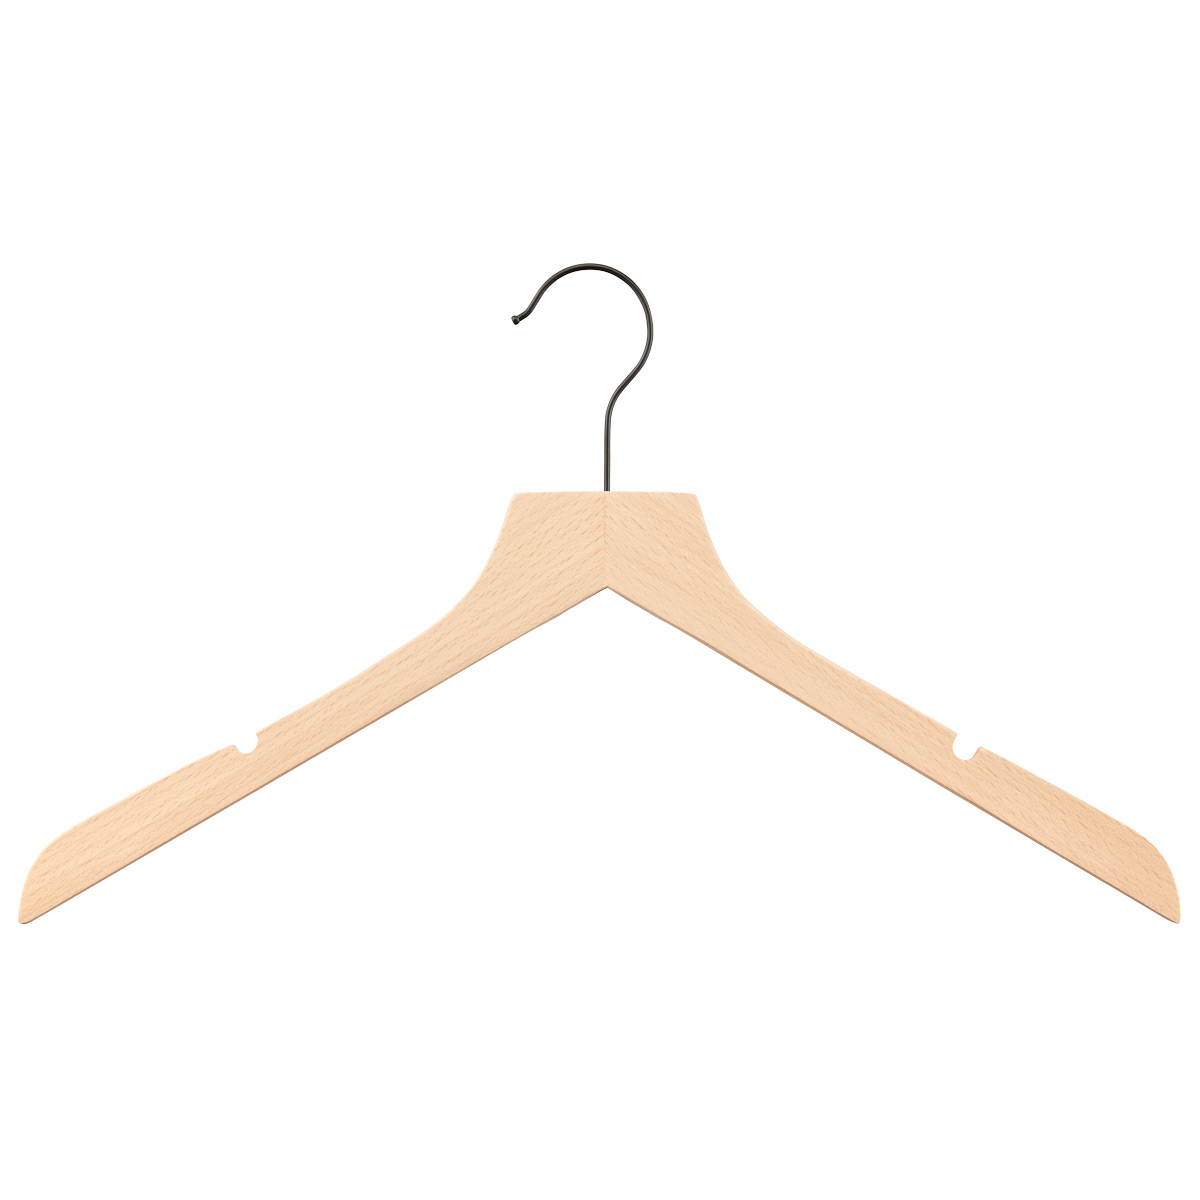 https://www.containerstore.com/catalogimages/413399/10083475_slim_wood_shirt_hanger_with.jpg